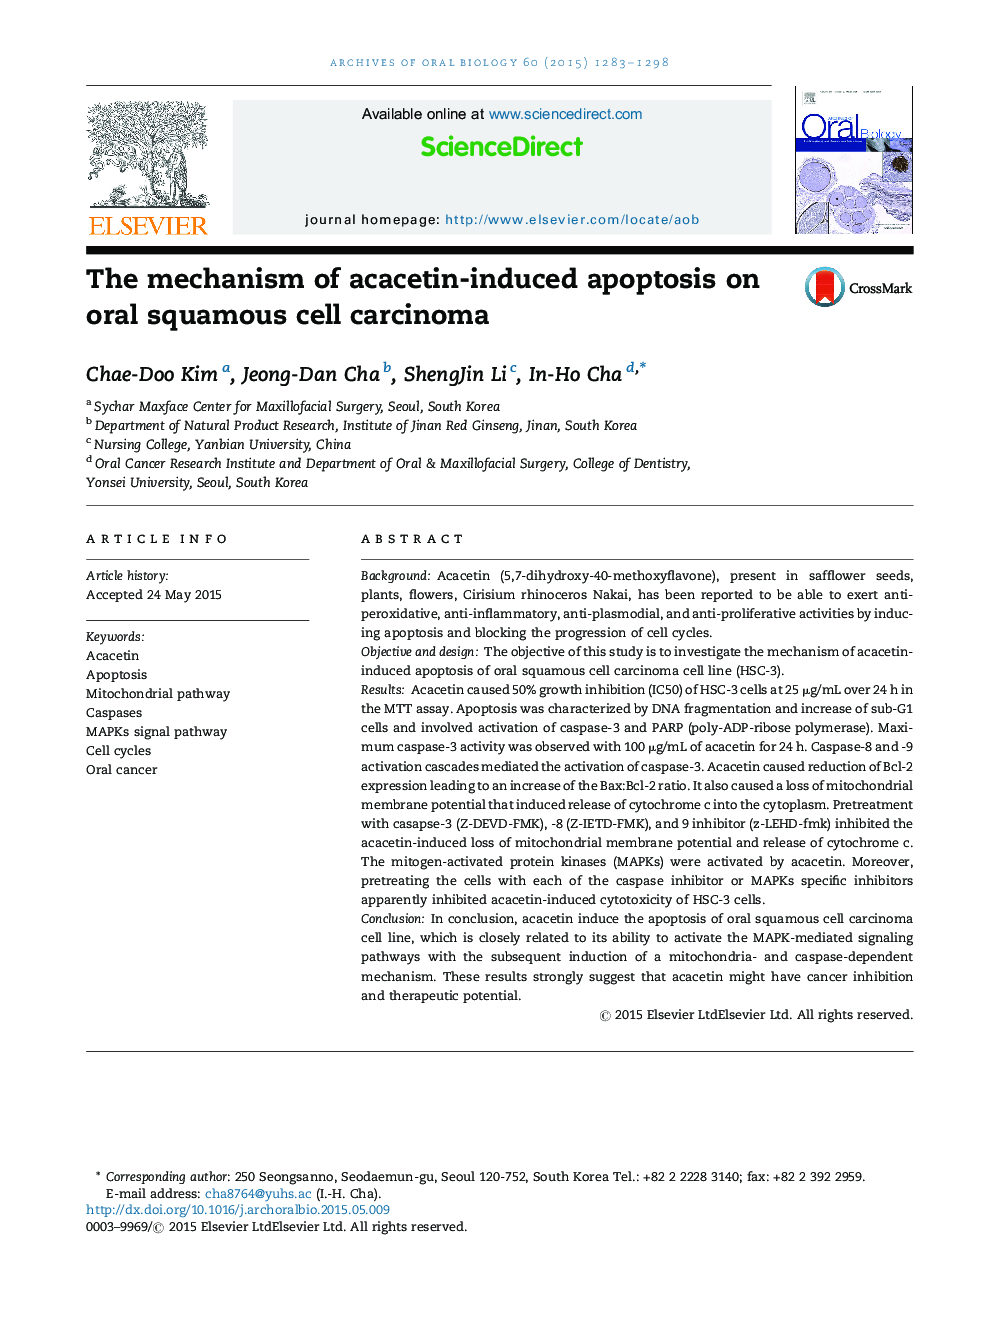 The mechanism of acacetin-induced apoptosis on oral squamous cell carcinoma